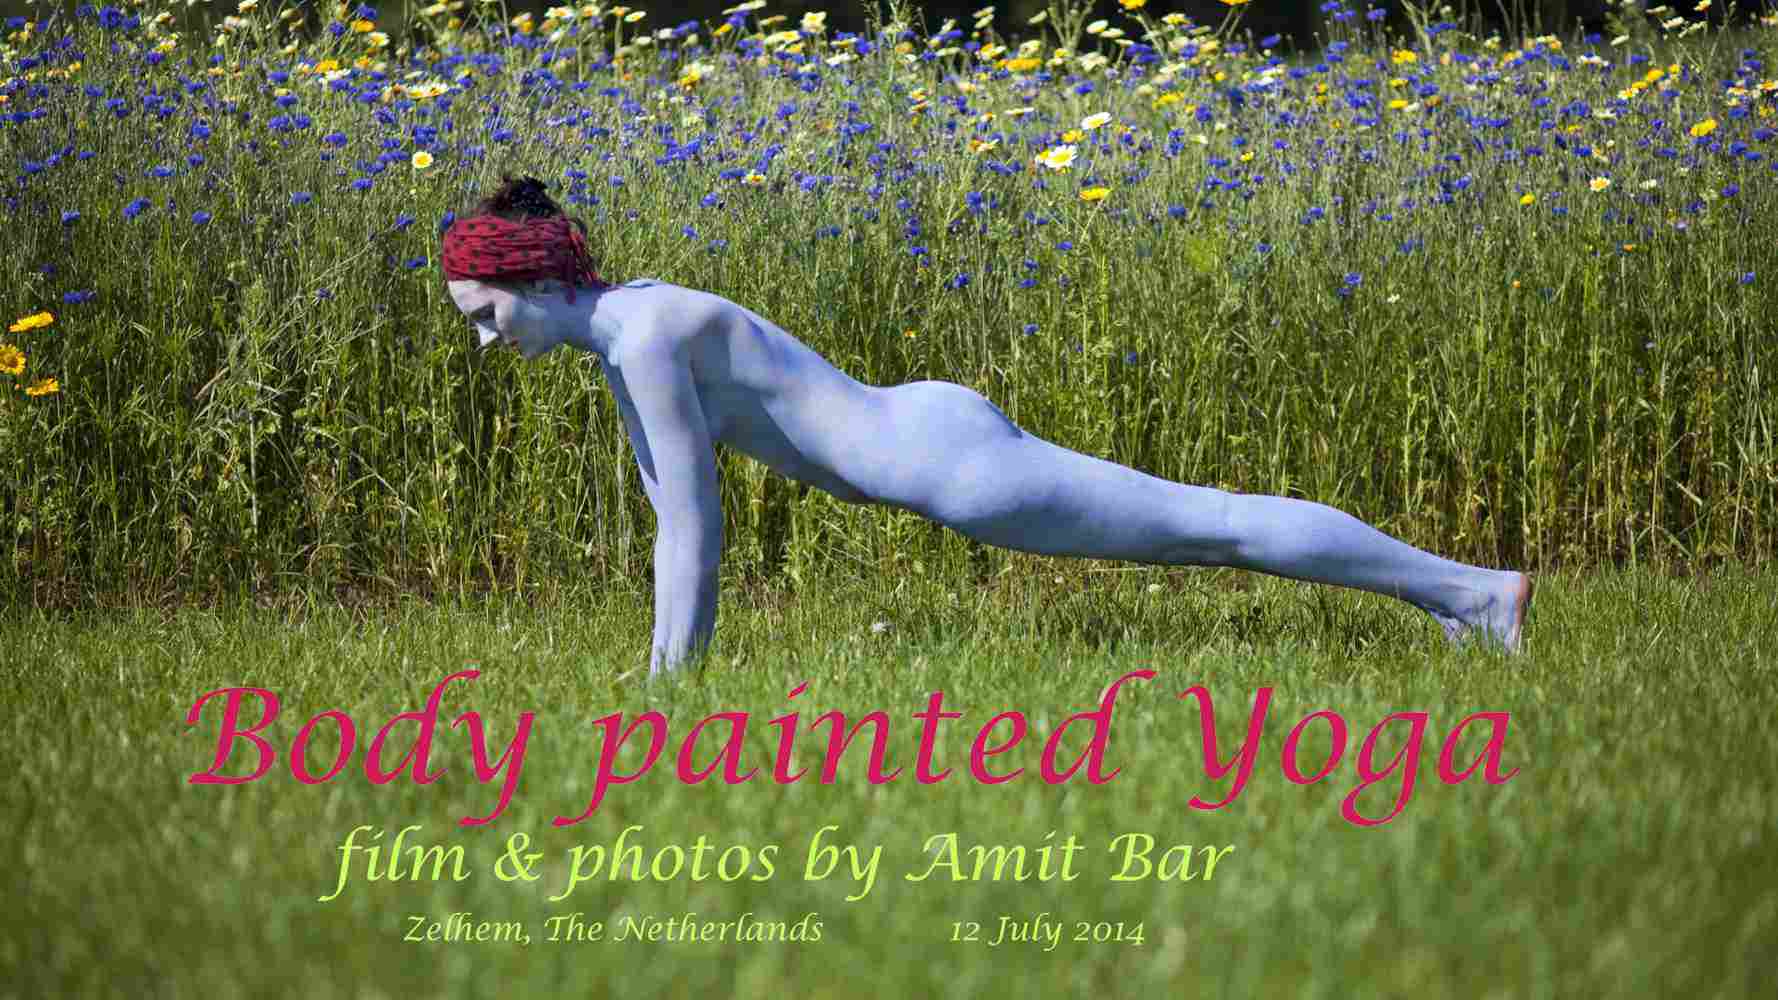 Yoga video: Yoga is very relaxing, all the more so when executed by a beautiful girl alongside a field with blooming wild flowers.